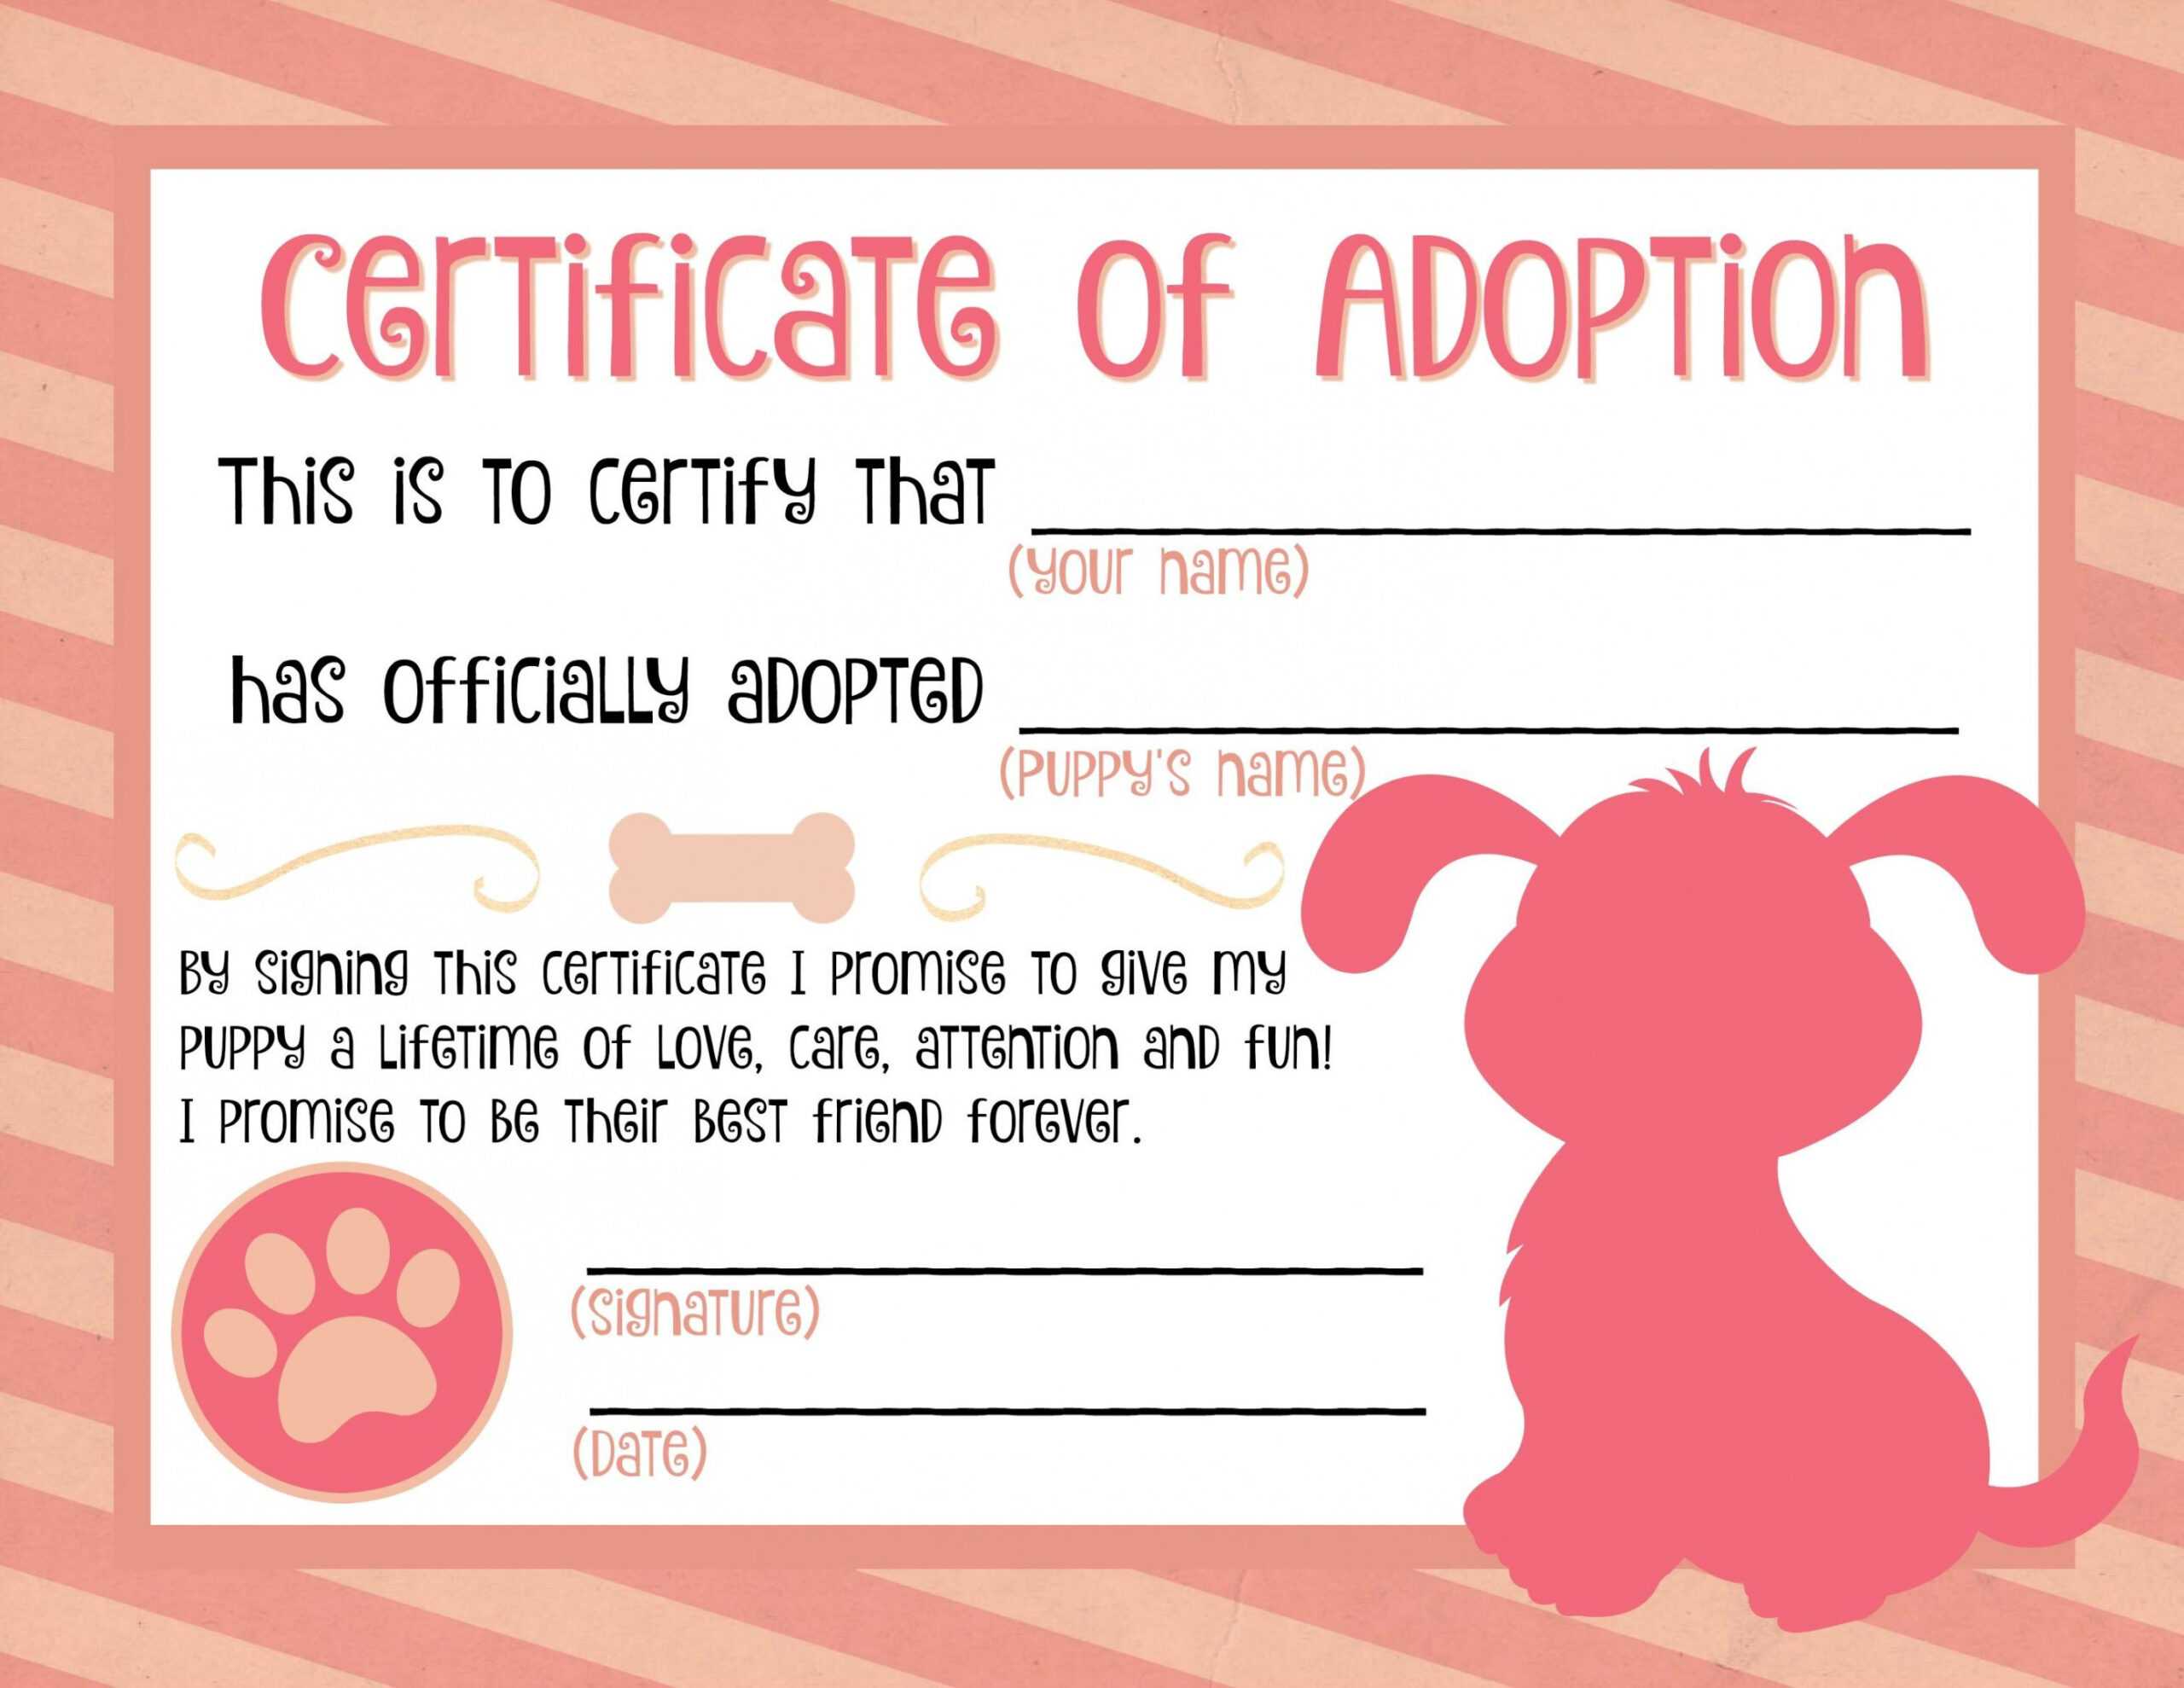 Puppy Adoption Certificate … Party Ideas In 2019… Pet Throughout Pet Adoption Certificate Template